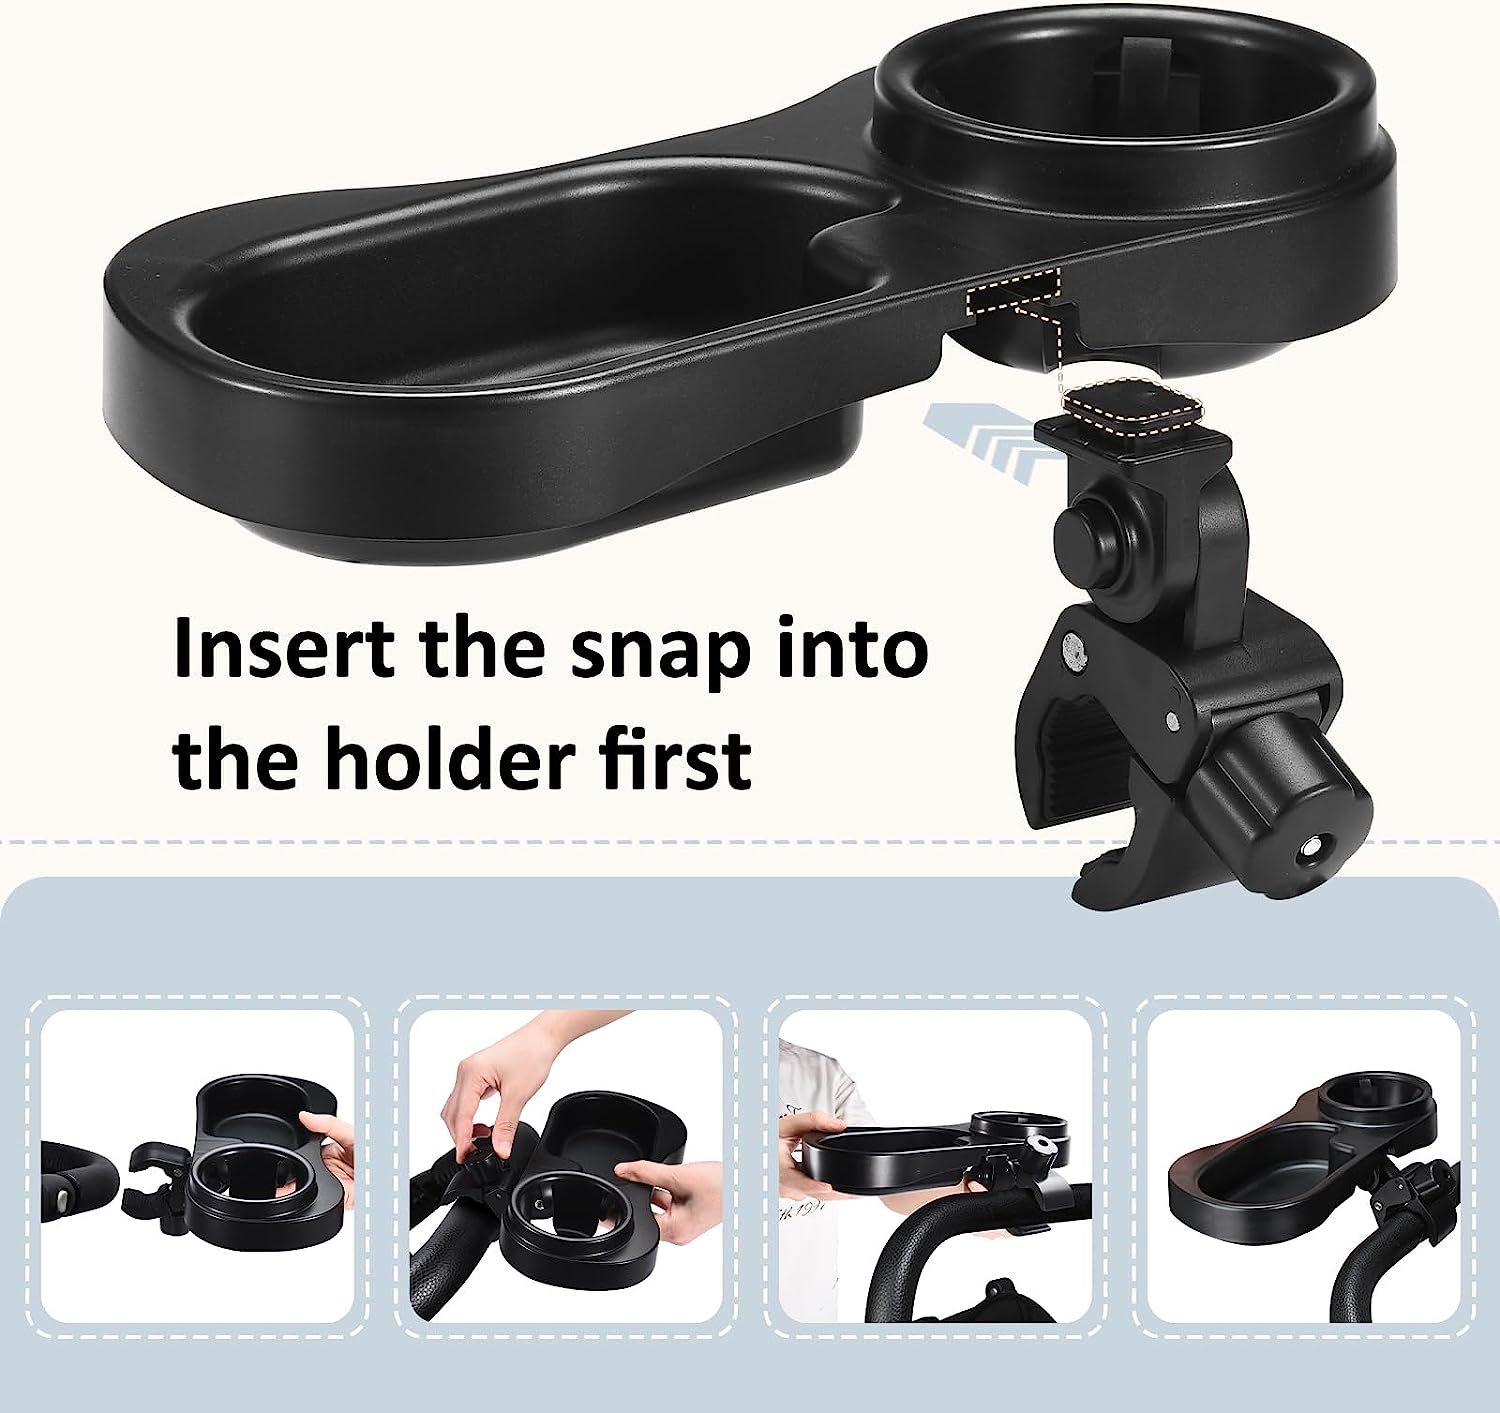 2 in 1 Universal Stroller Snack Tray with Cup Holder, Snack Catcher and Drink Holder for Stroller Snack Tray Attachment - Upgraded Removable Clip for Bumper Bar of Stroller Tray for Baby (Black)